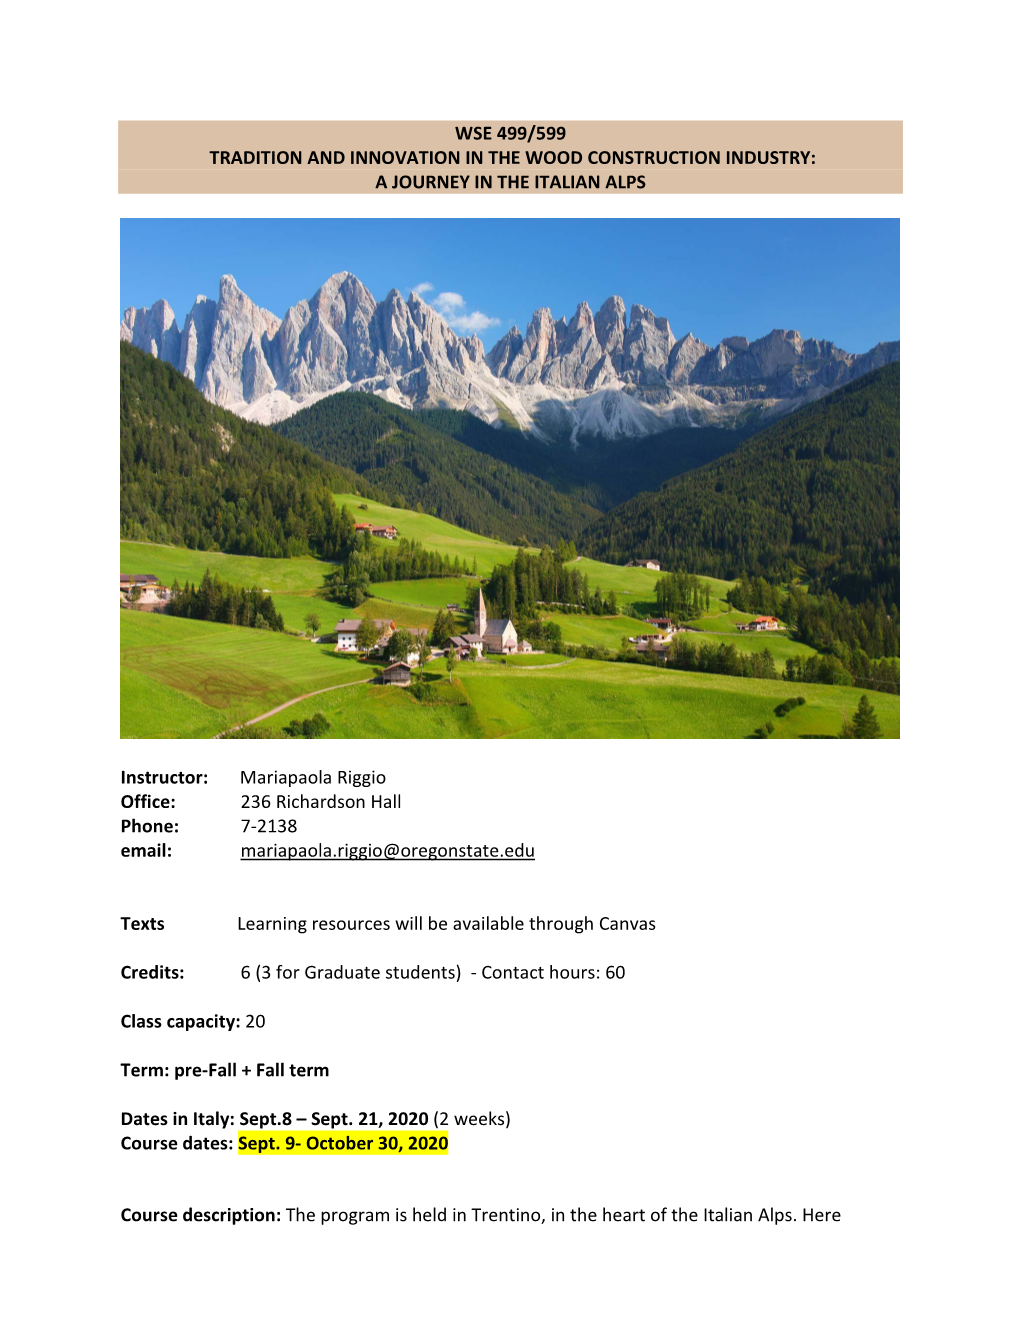 Wse 499/599 Tradition and Innovation in the Wood Construction Industry: a Journey in the Italian Alps